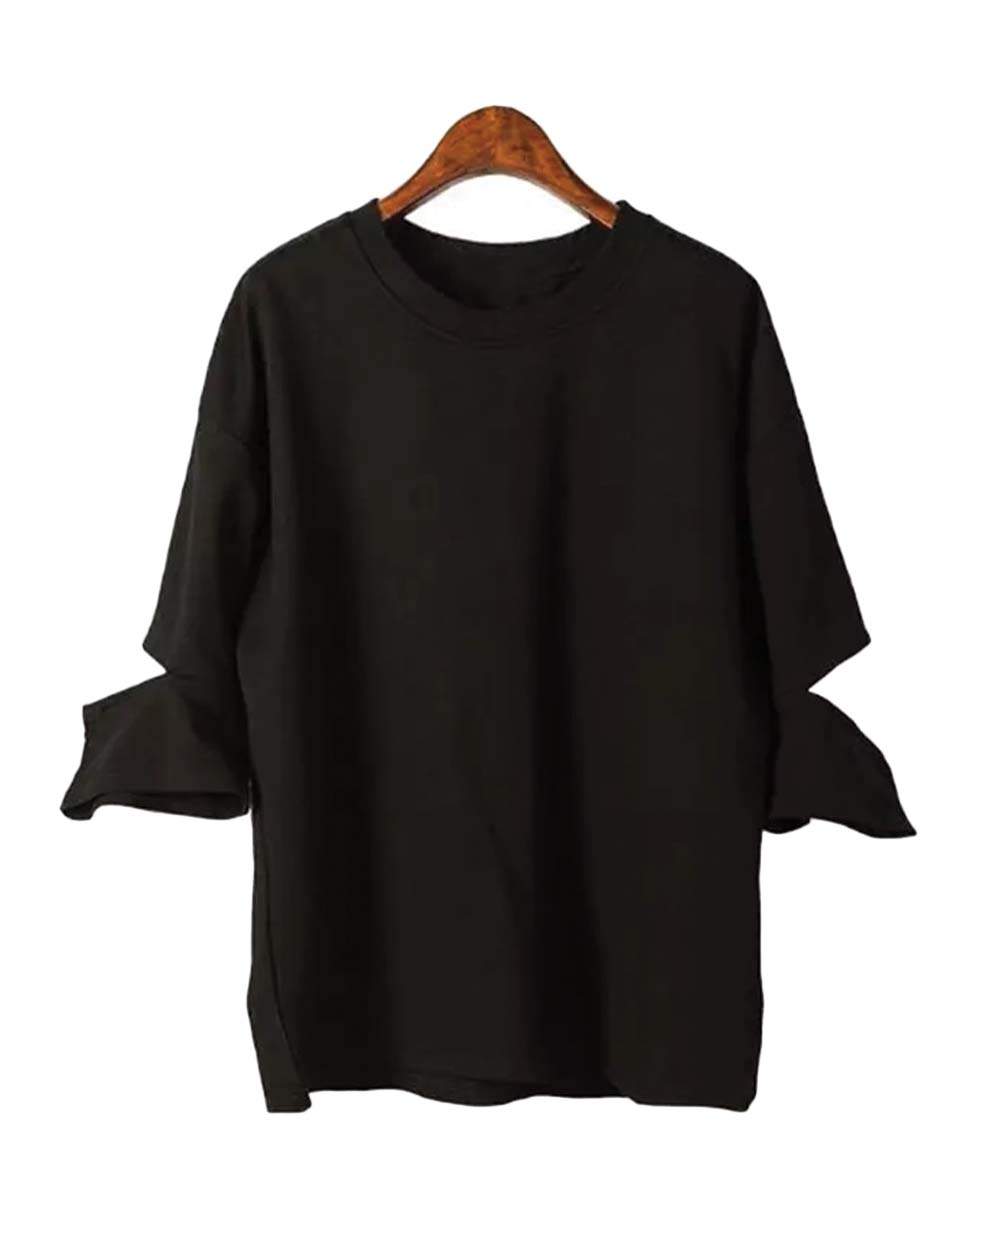 Cut-Out Sleeves T-Shirt - COLORS